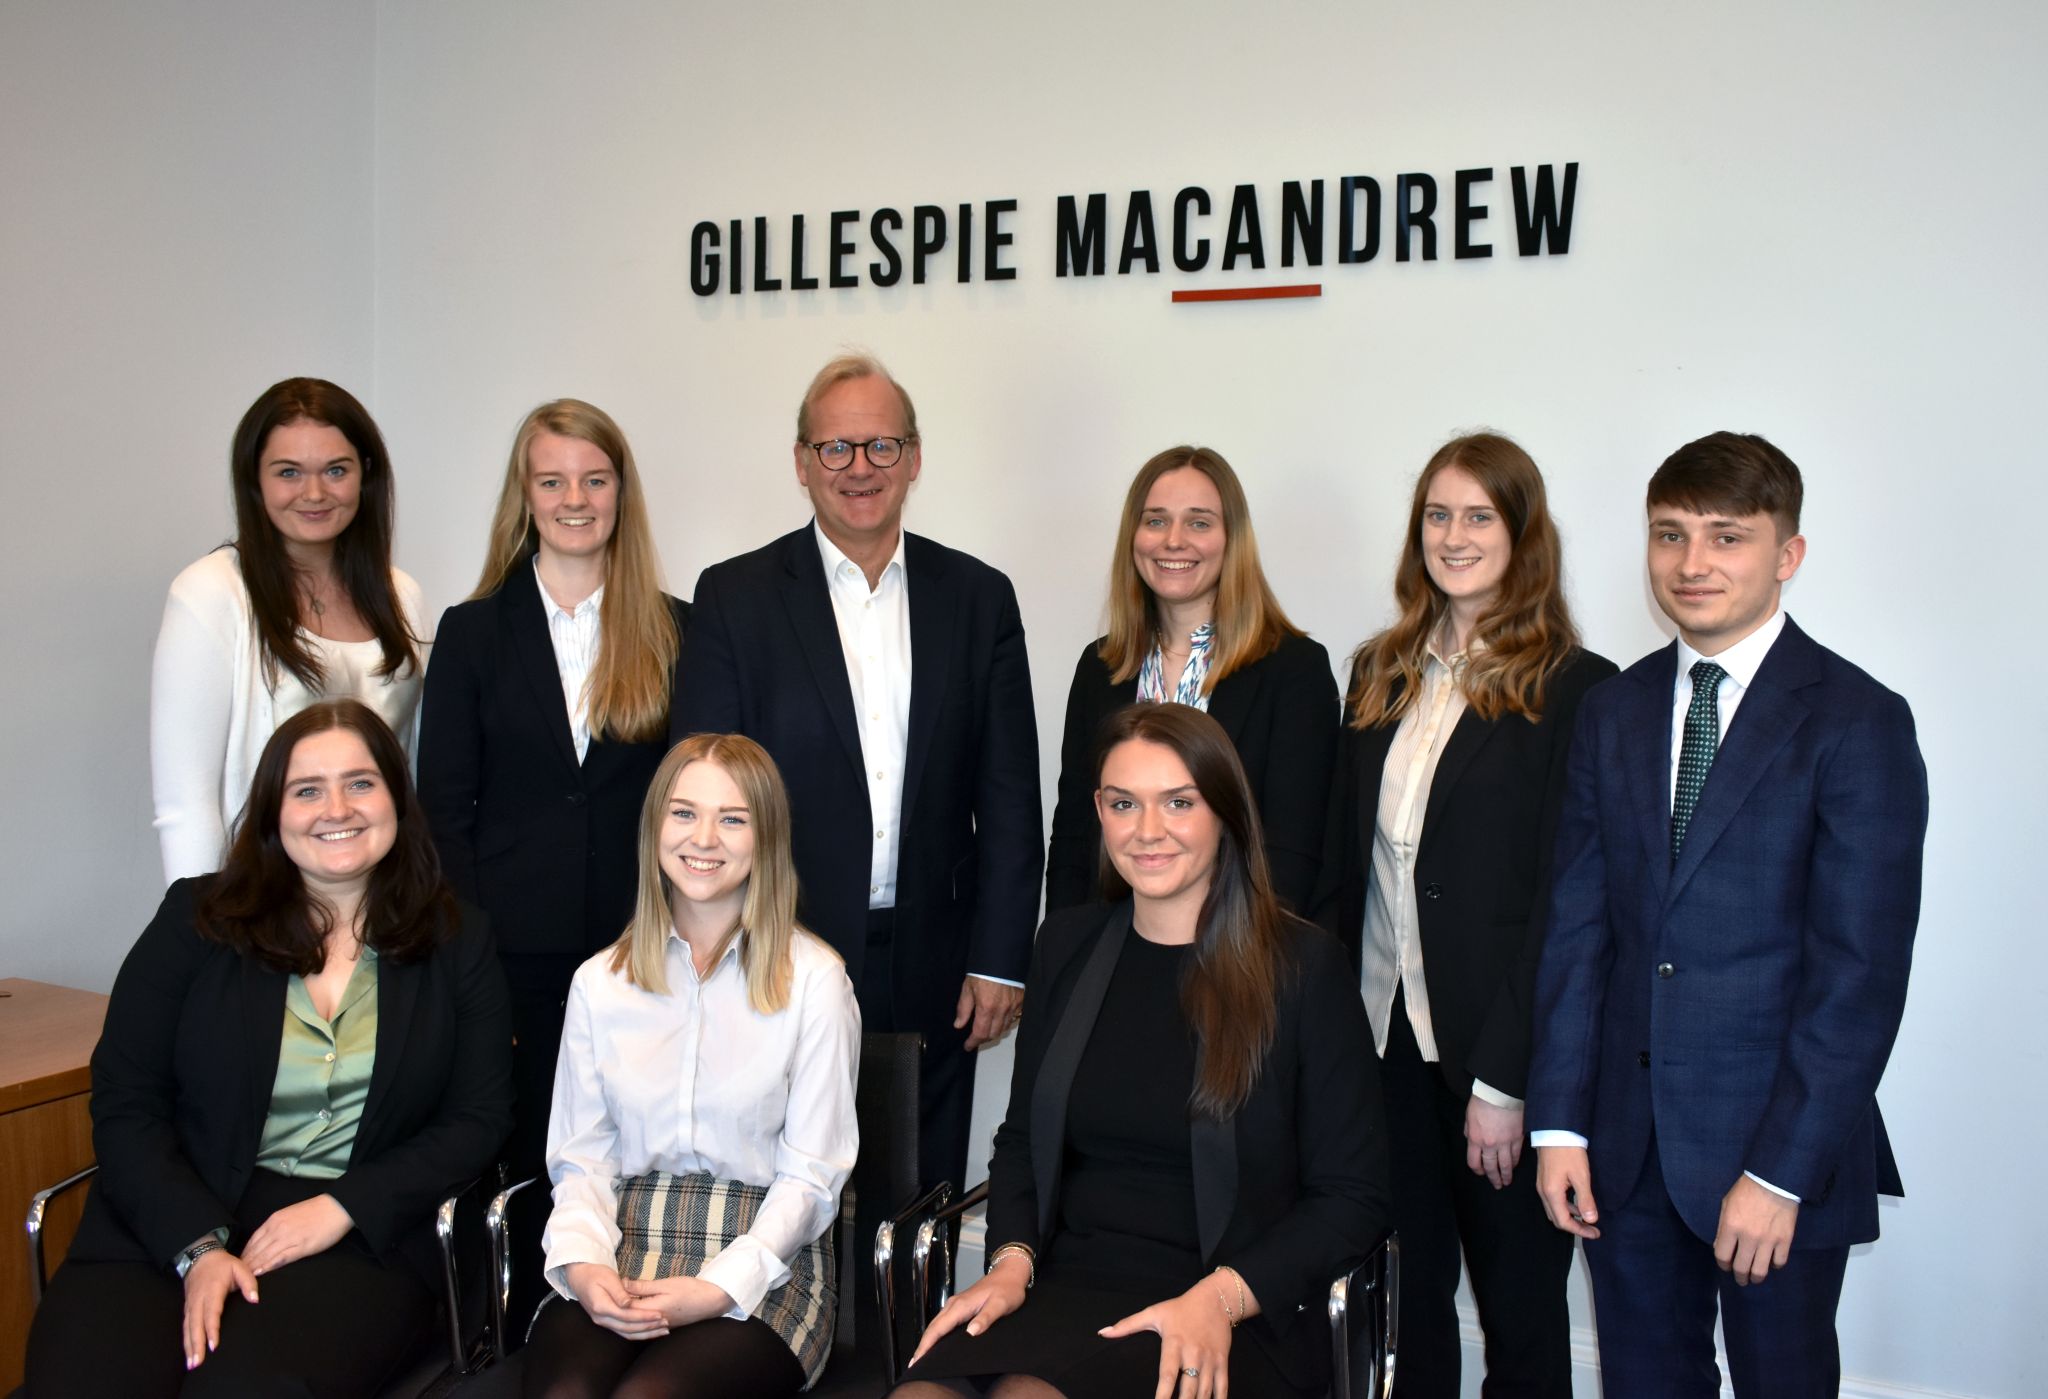 In pictures: New trainees at Gillespie Macandrew